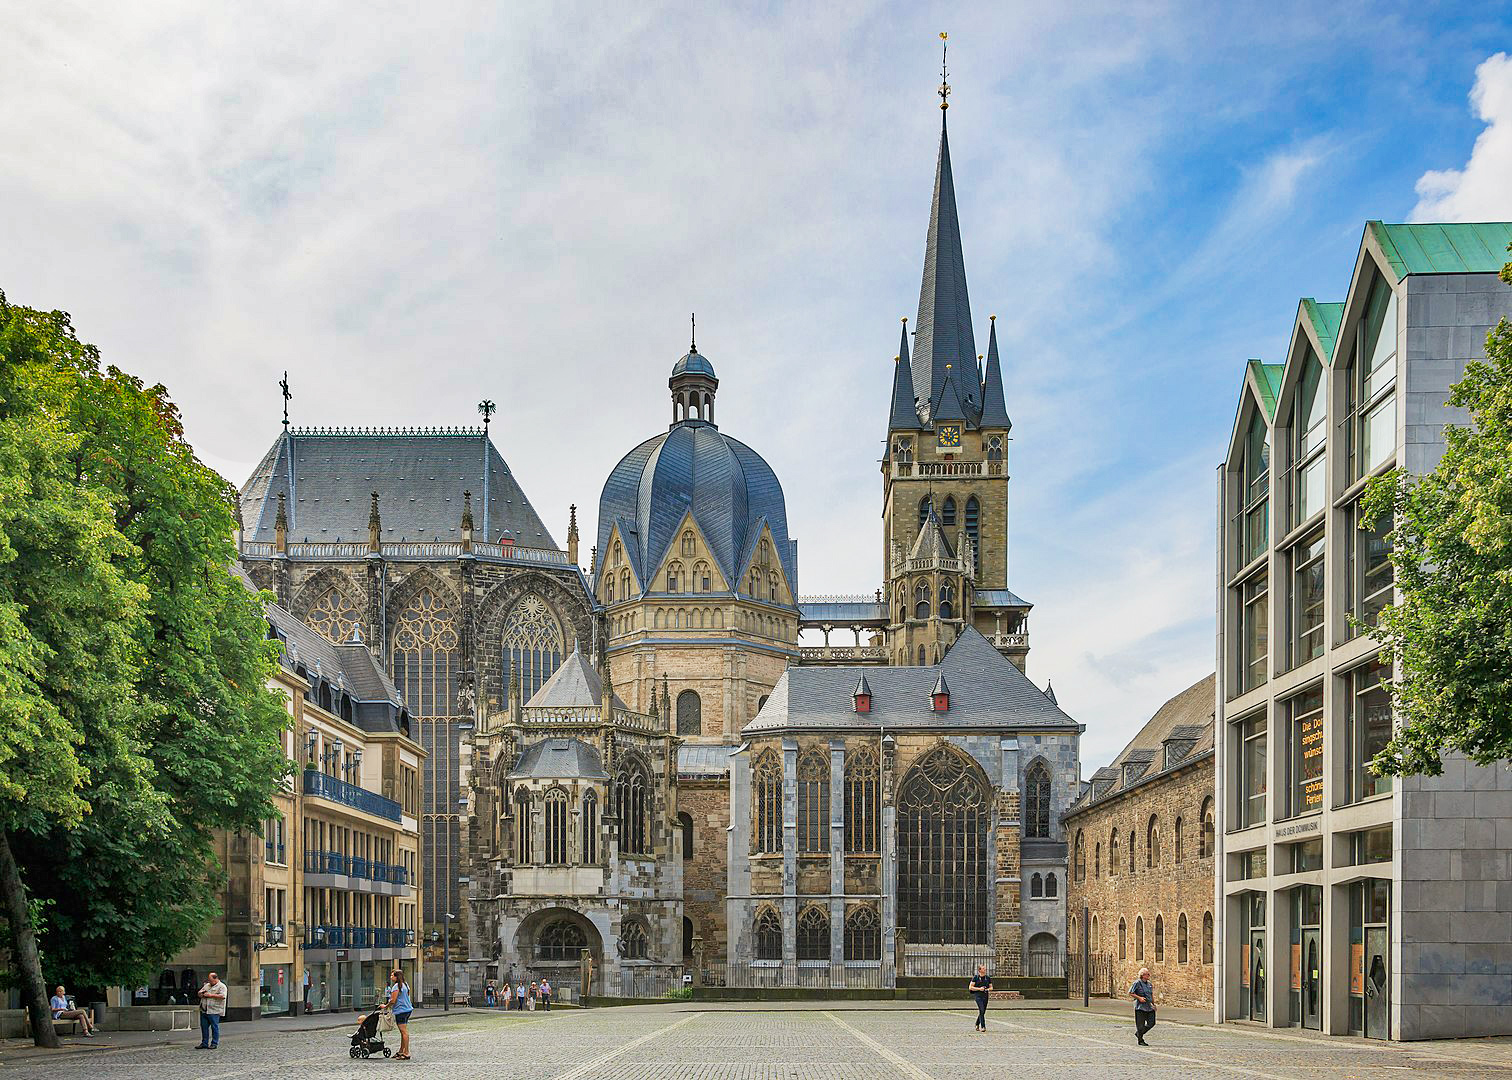 Aachen Imperial-Cathedral © CEphoto - licence [CC BY-SA 3.0] from Wikimedia Commons